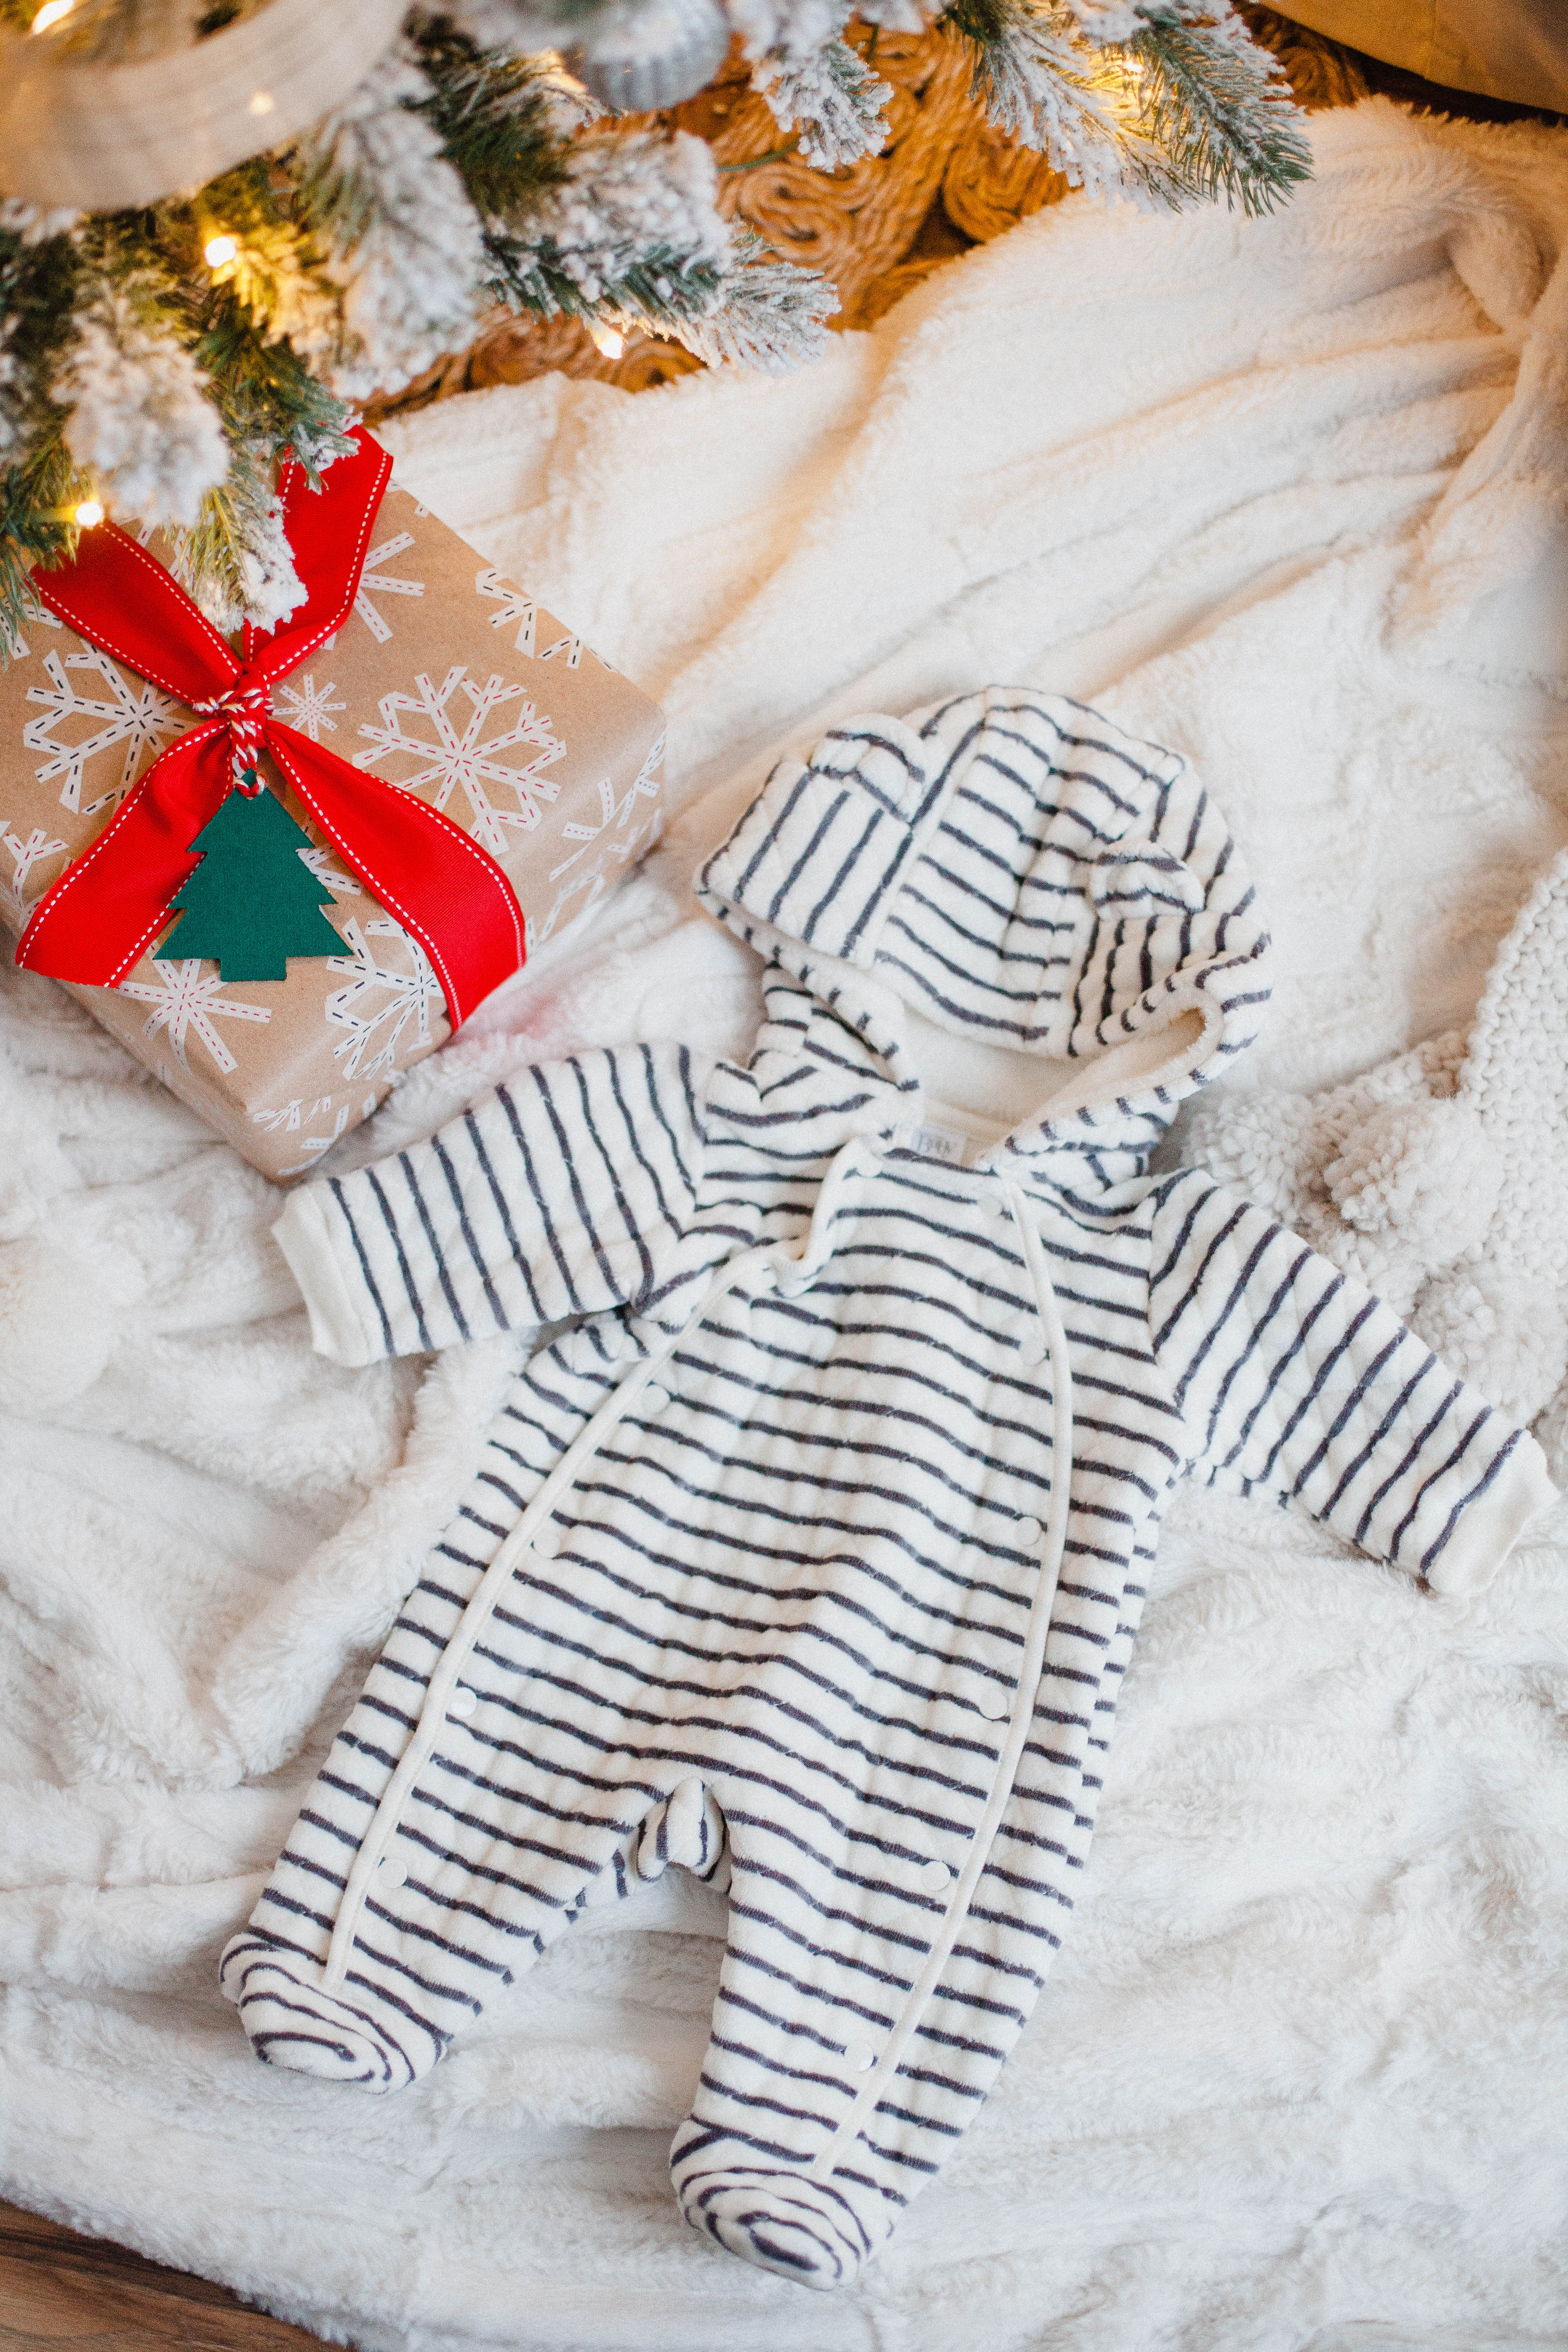 Life and style blogger Lauren McBride shares Holiday Gifts for Babies Under $50 that make great gifts for expecting parents, too!